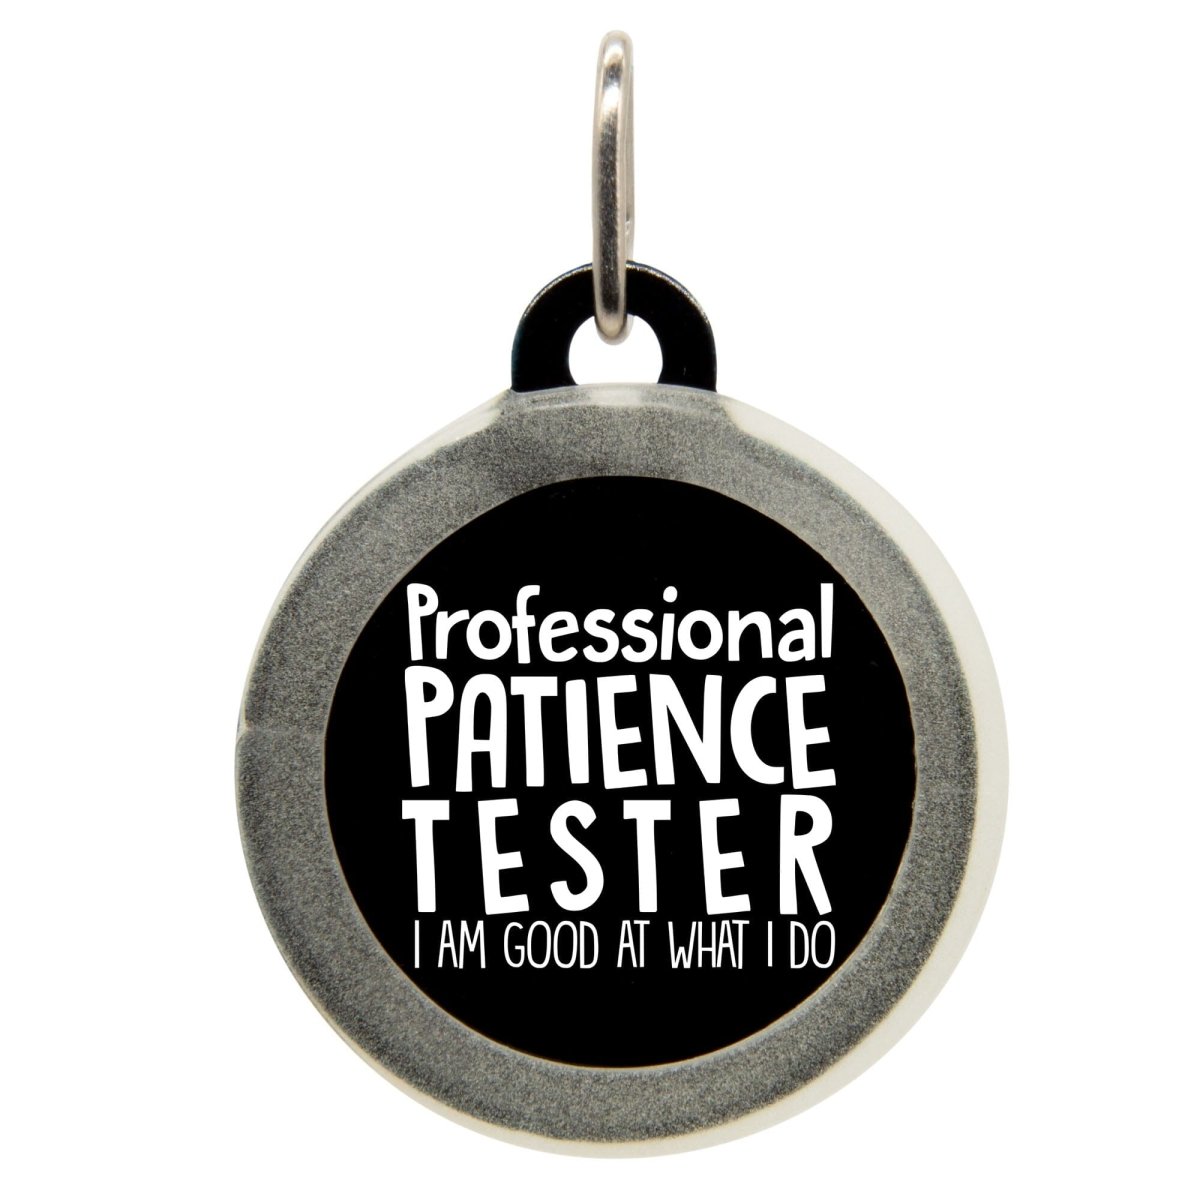 Professional Patience Tester Name Tag - Oh My Paw'd